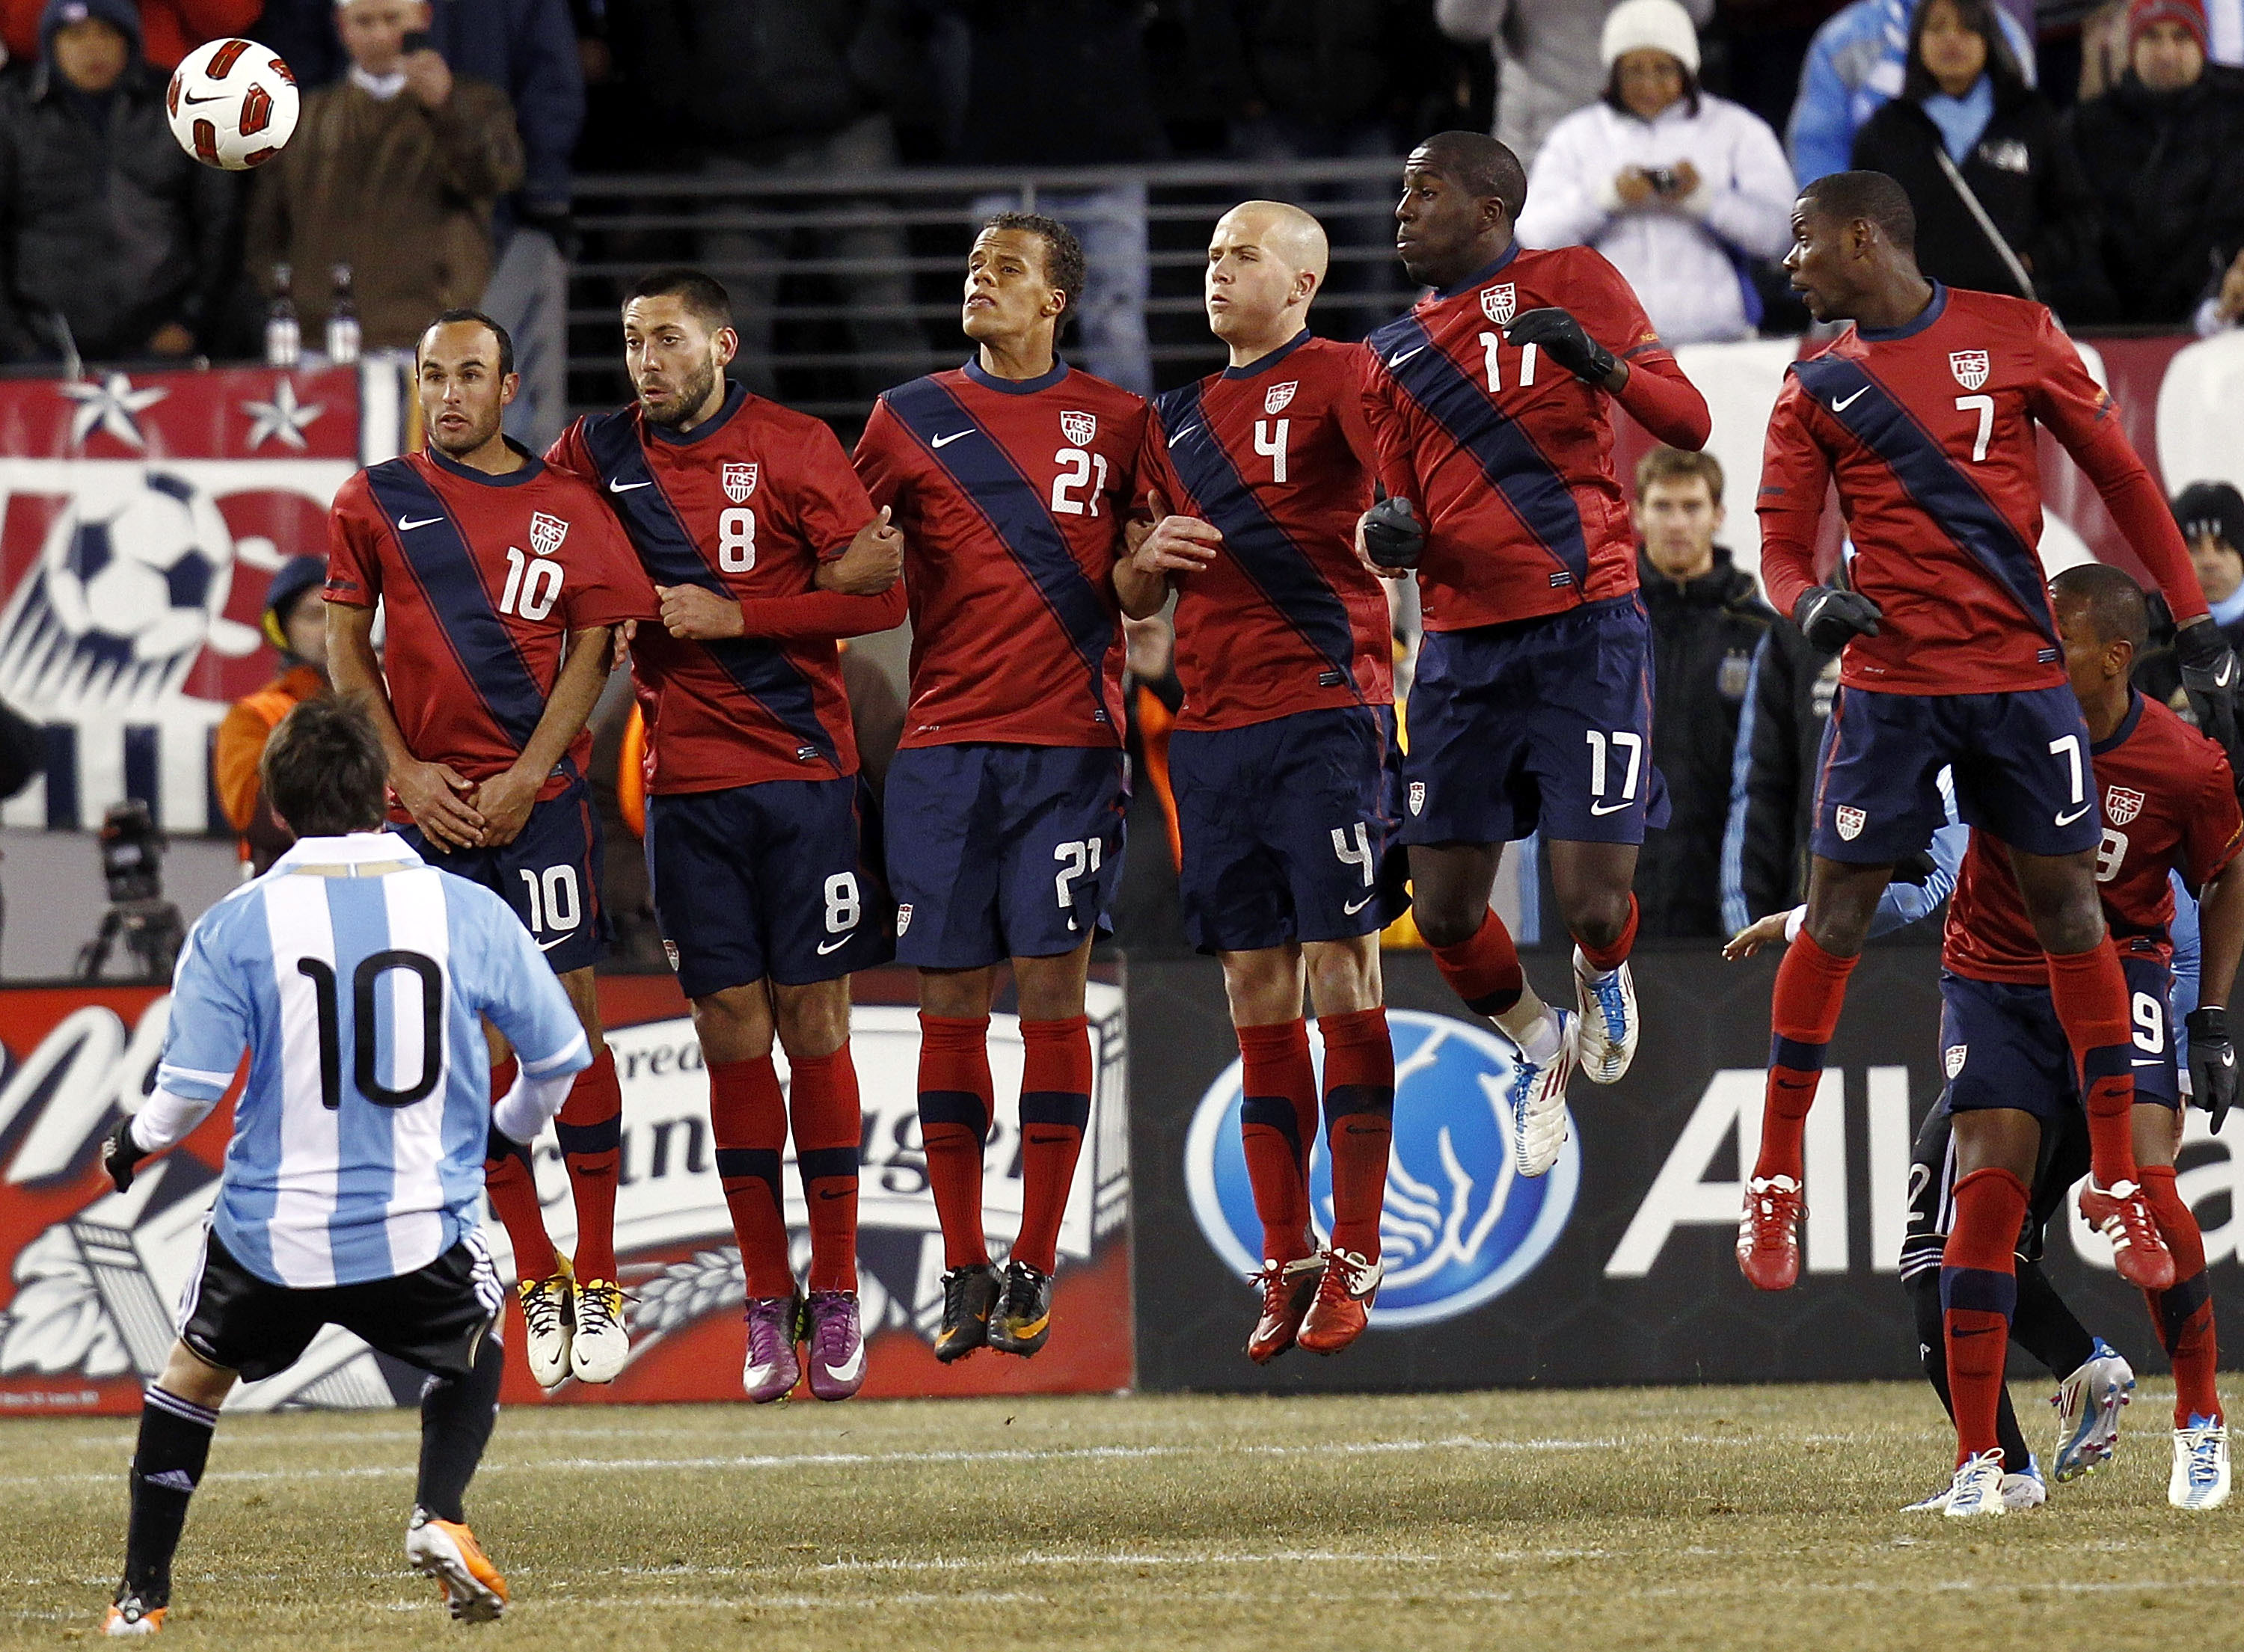 EAST RUTHERFORD, NJ - MARCH 26:  The United States lines up to defend a free kick by Lionel Messi #10 of Argentina during the second half of a friendly match at New Meadowlands Stadium on March 26, 2011 in East Rutherford, New Jersey.  (Photo by Jeff Zele